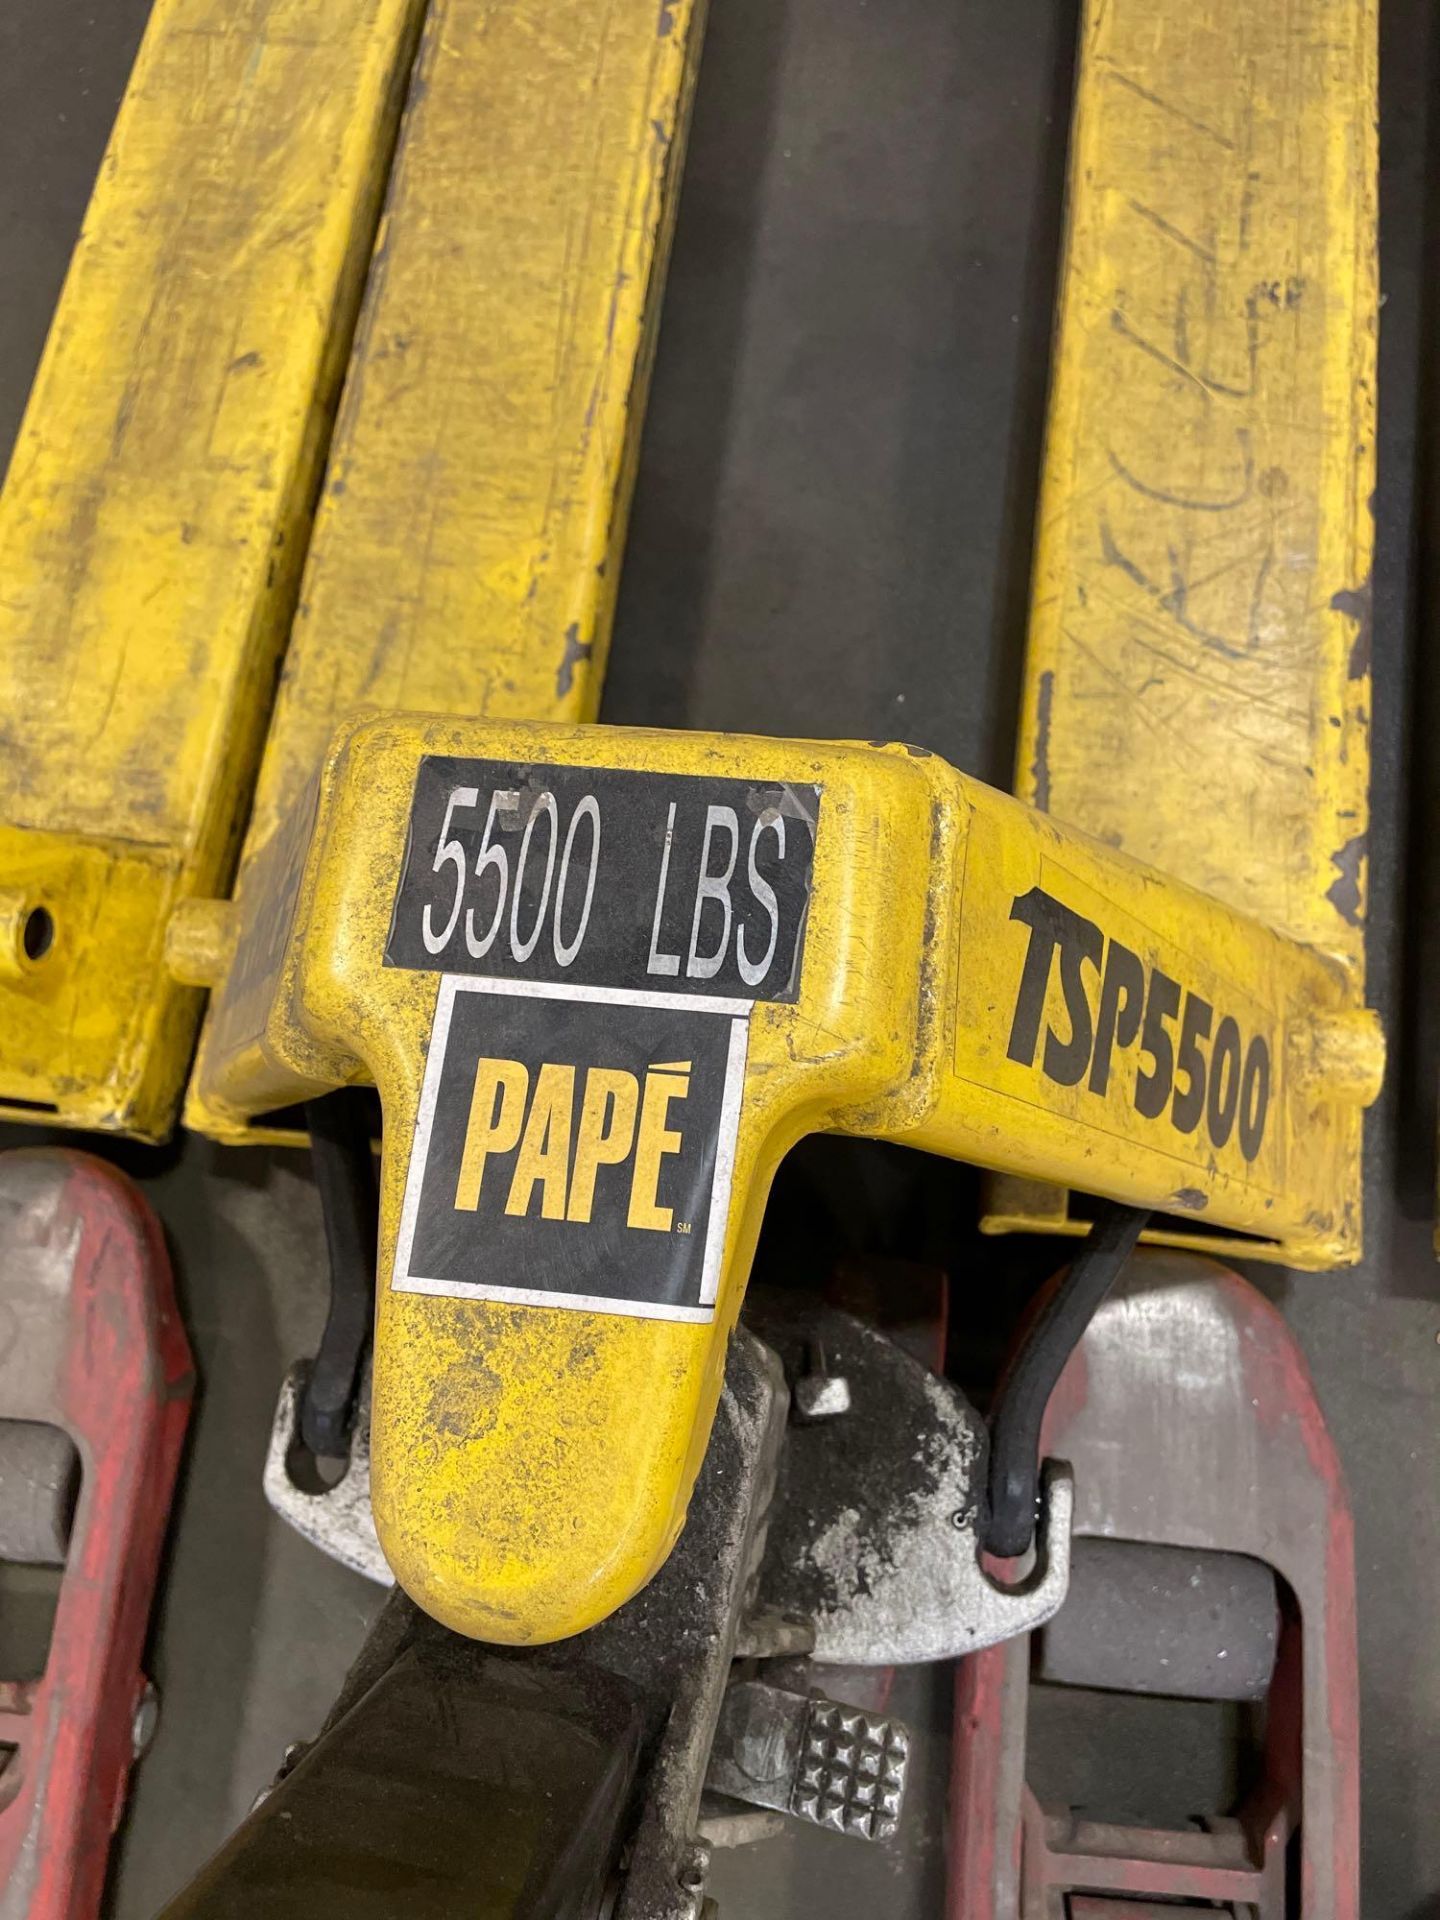 Lot of 2 Pallet Jacks: (1) Silver State, max. 5,500 lbs., (1) Hyster, max. 5,500 lbs. - Image 4 of 4